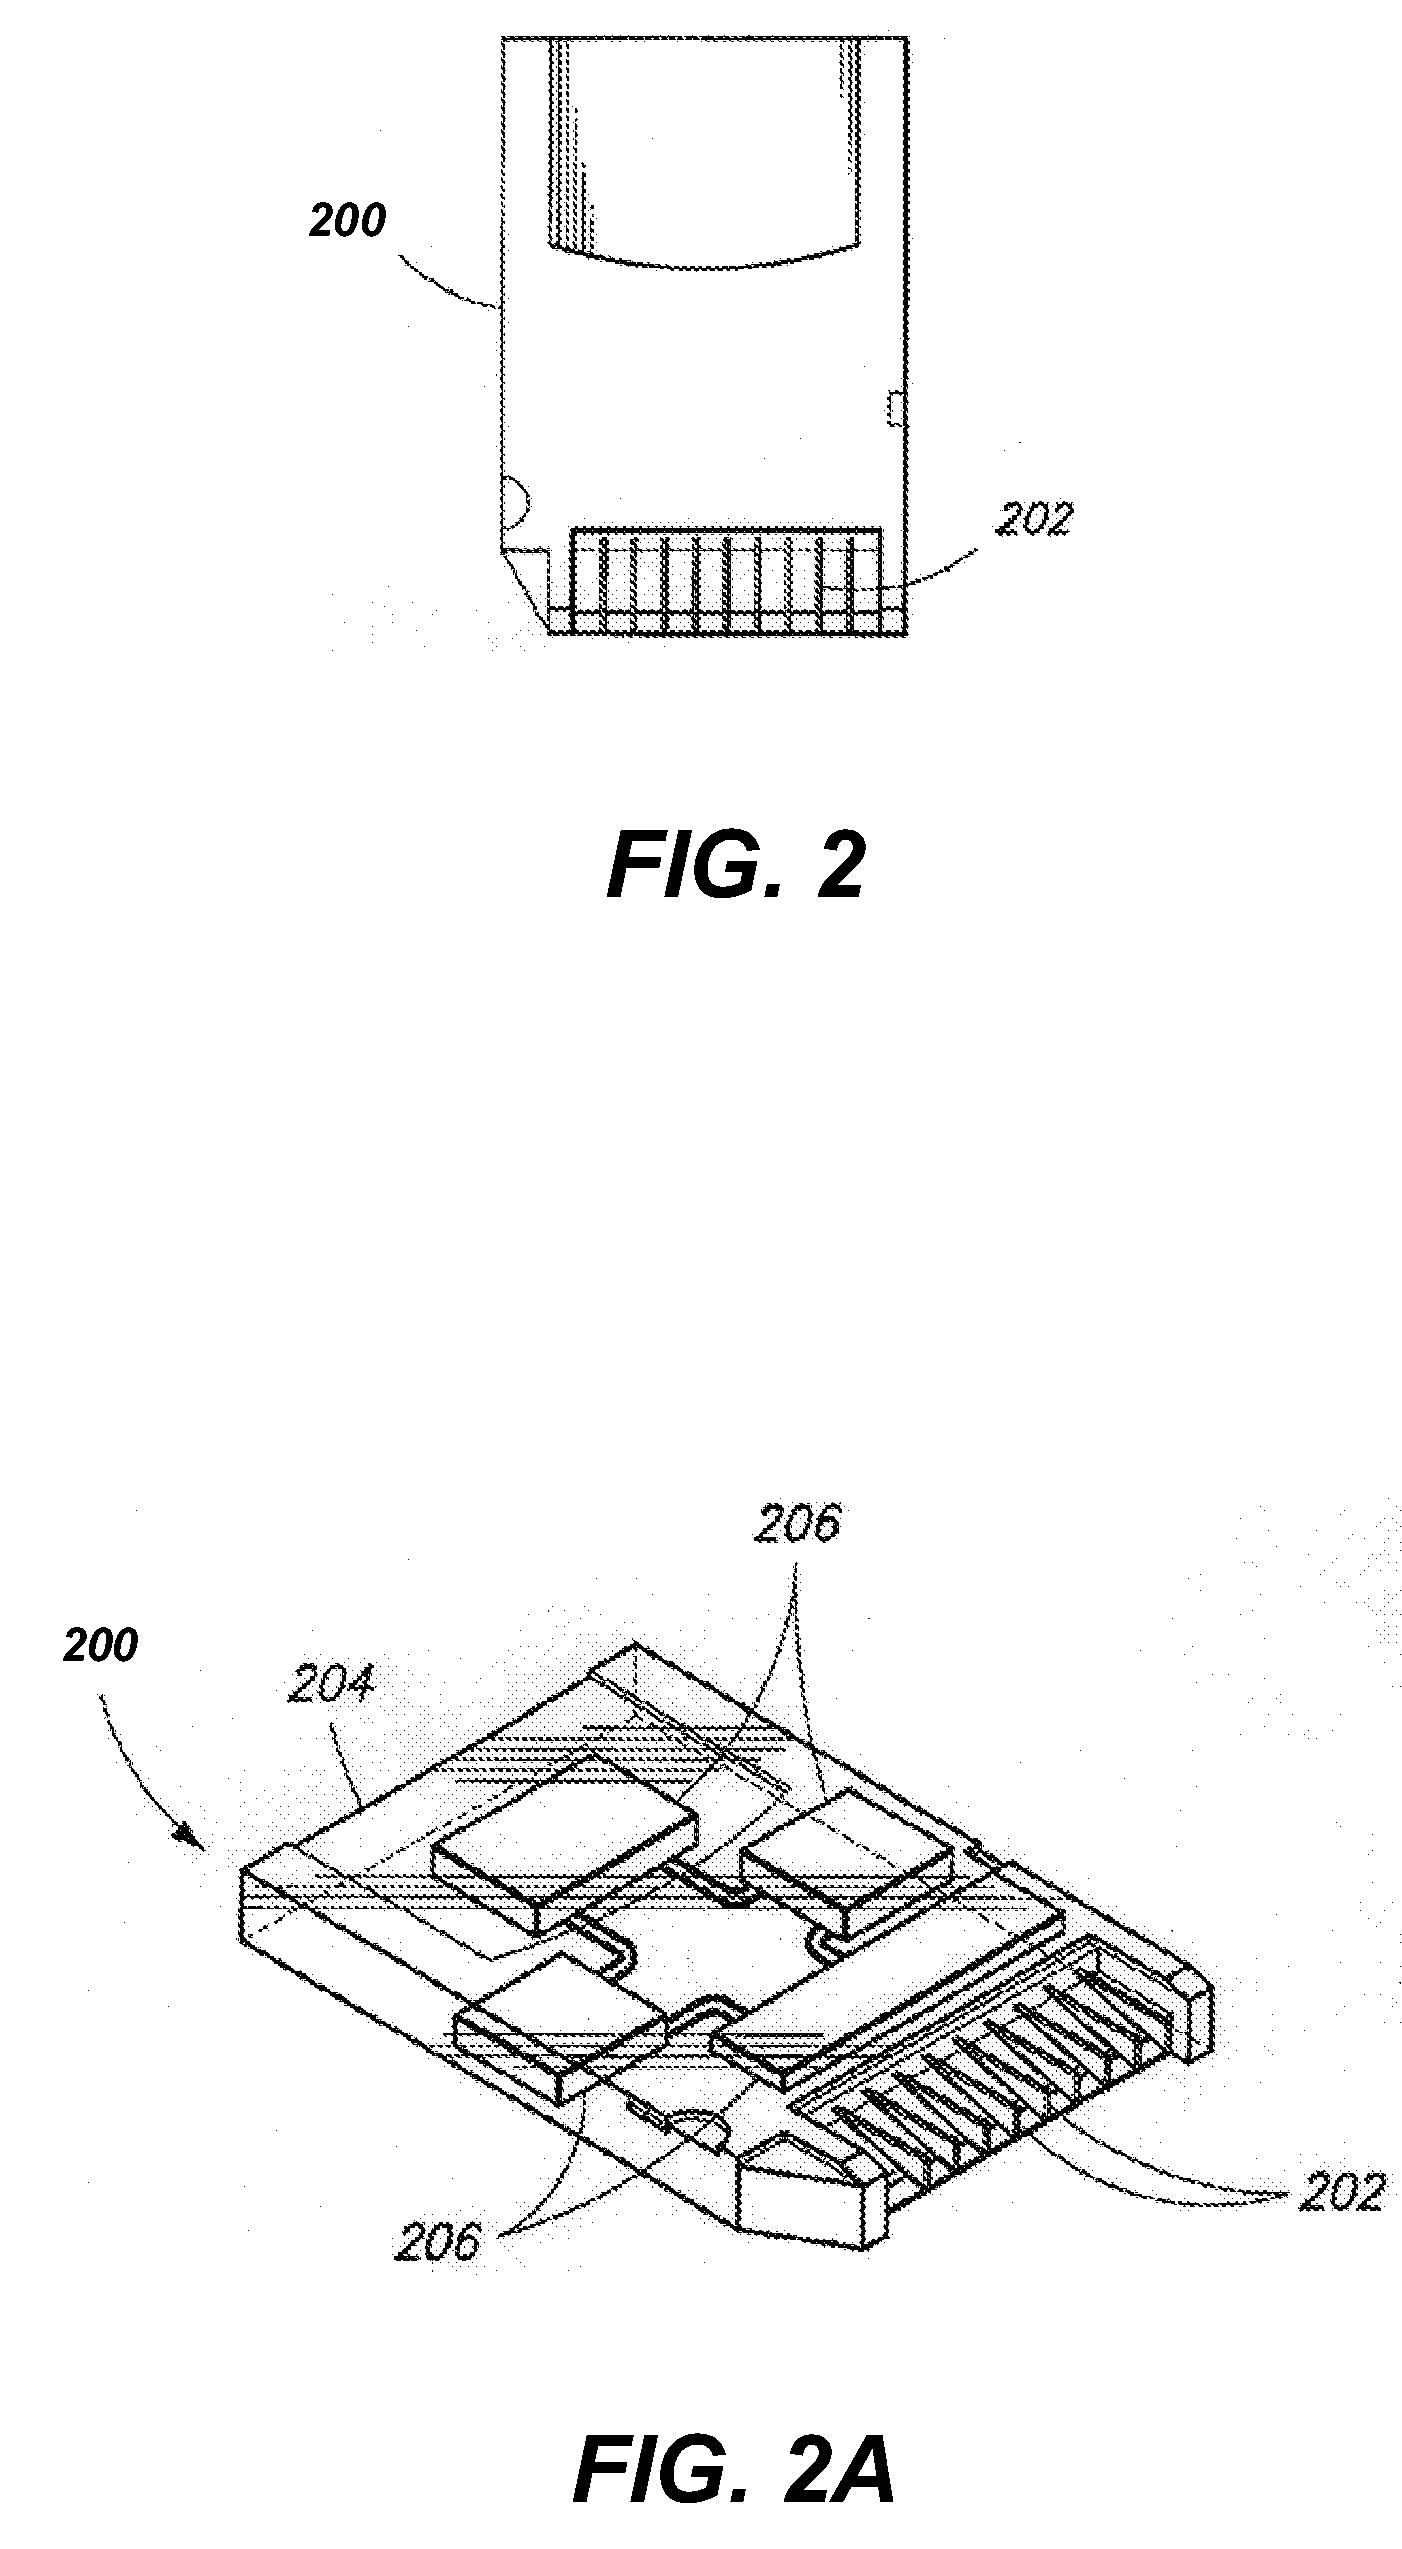 Systems and methods for performing wireless financial transactions